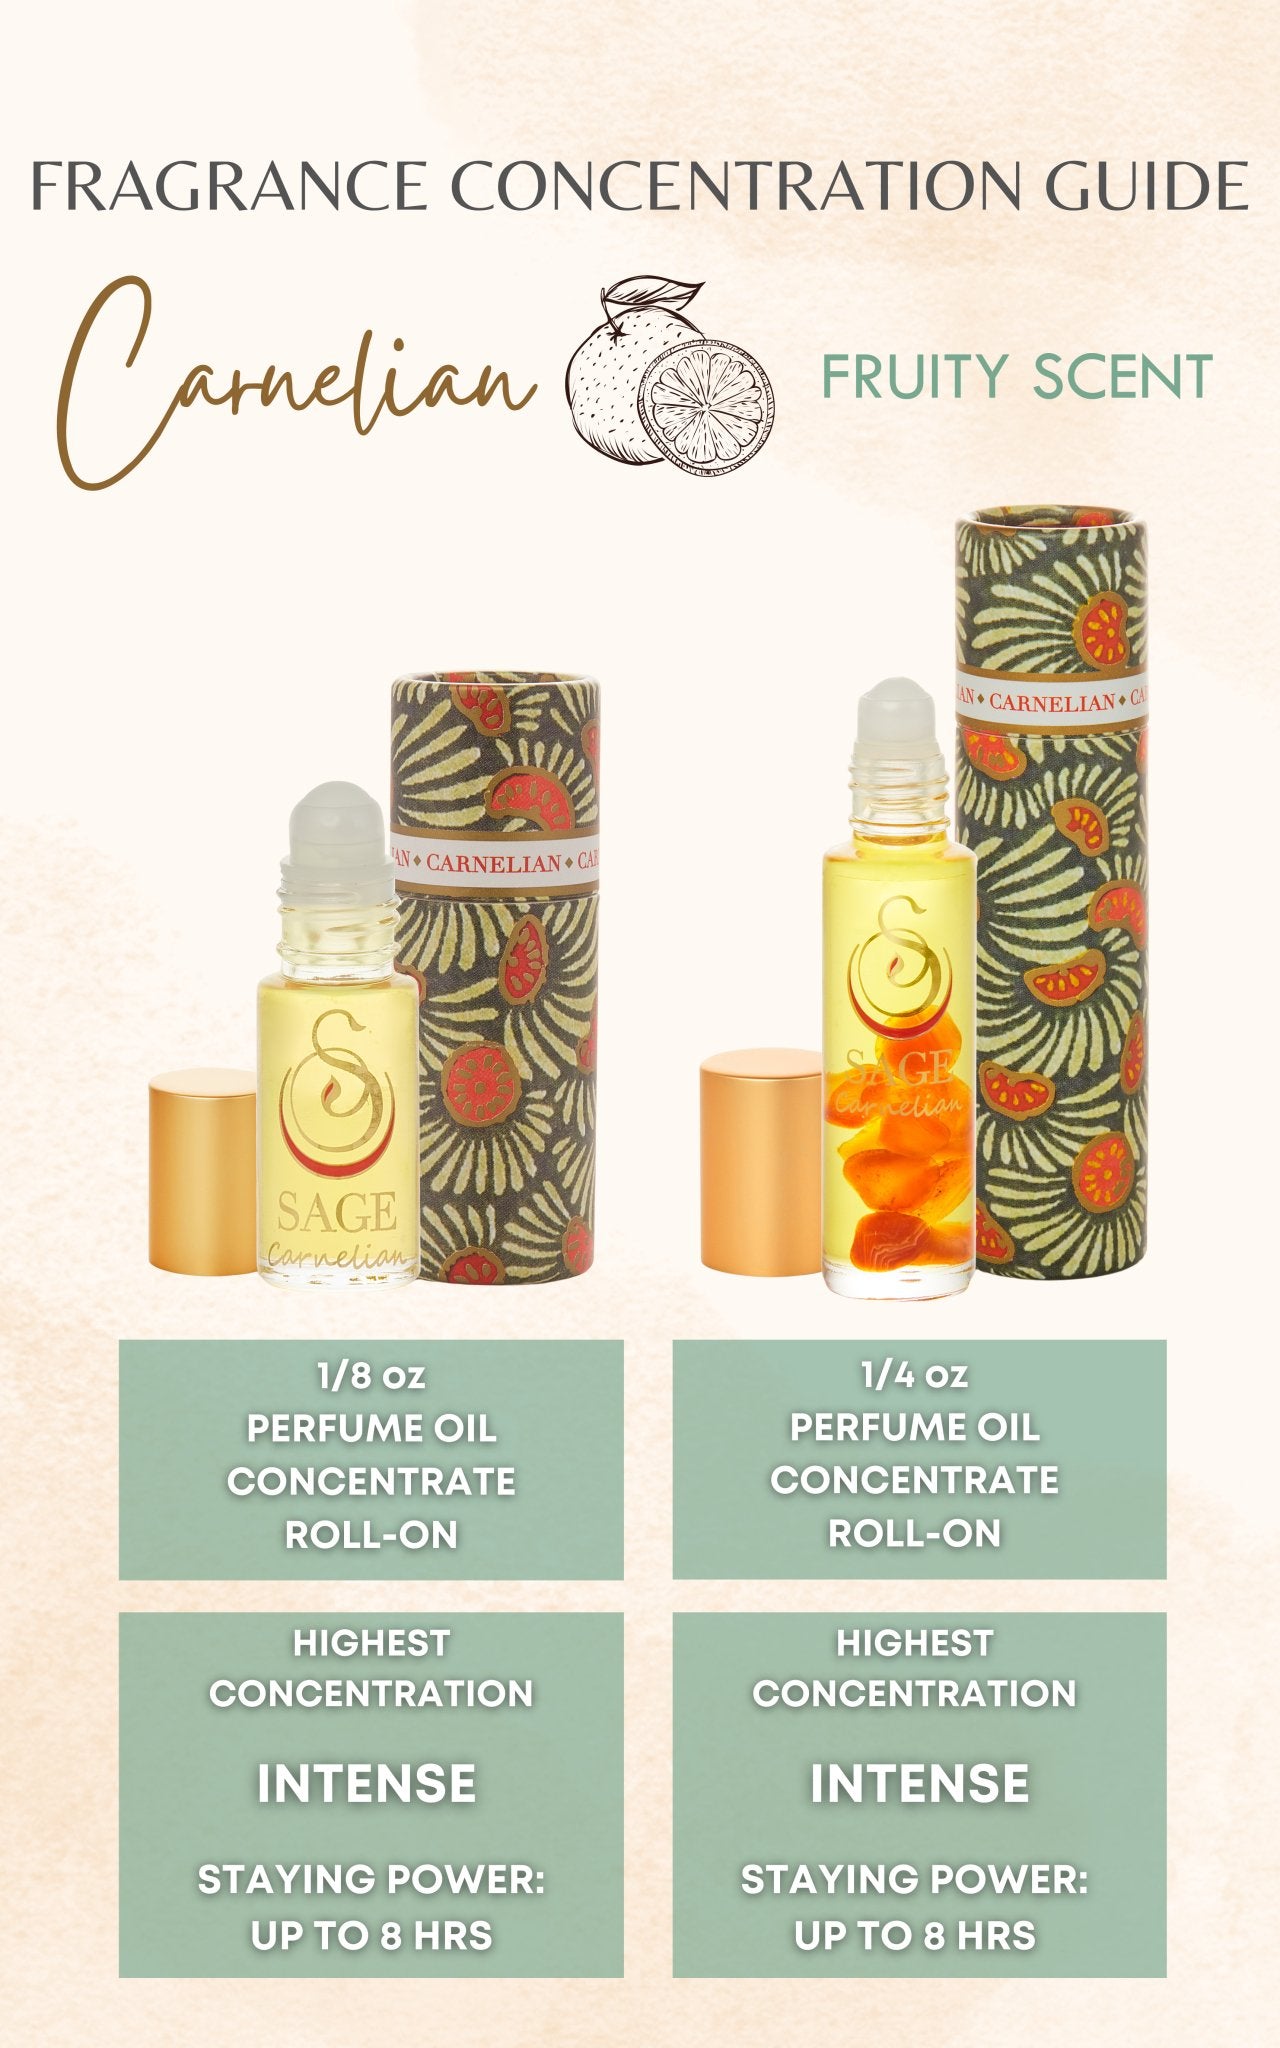 Carnelian 1/8 oz Perfume Oil Concentrate Roll-On by Sage - The Sage Lifestyle